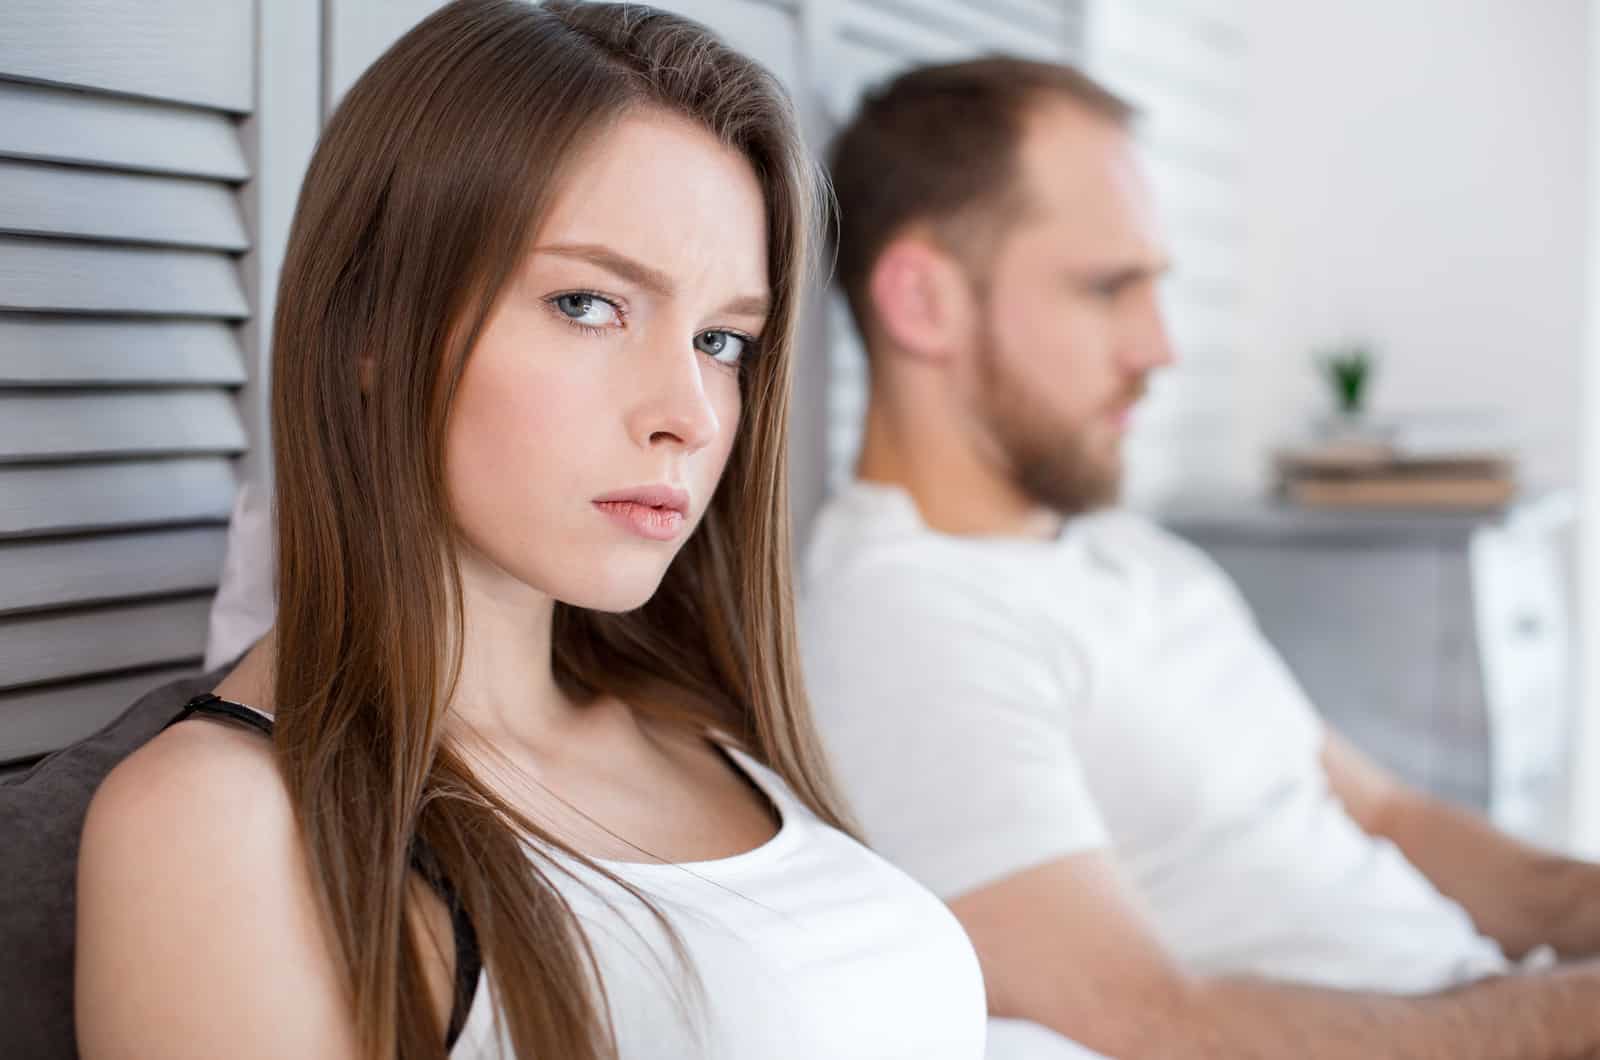 worried woman thinking while her boyfriend sits next to her